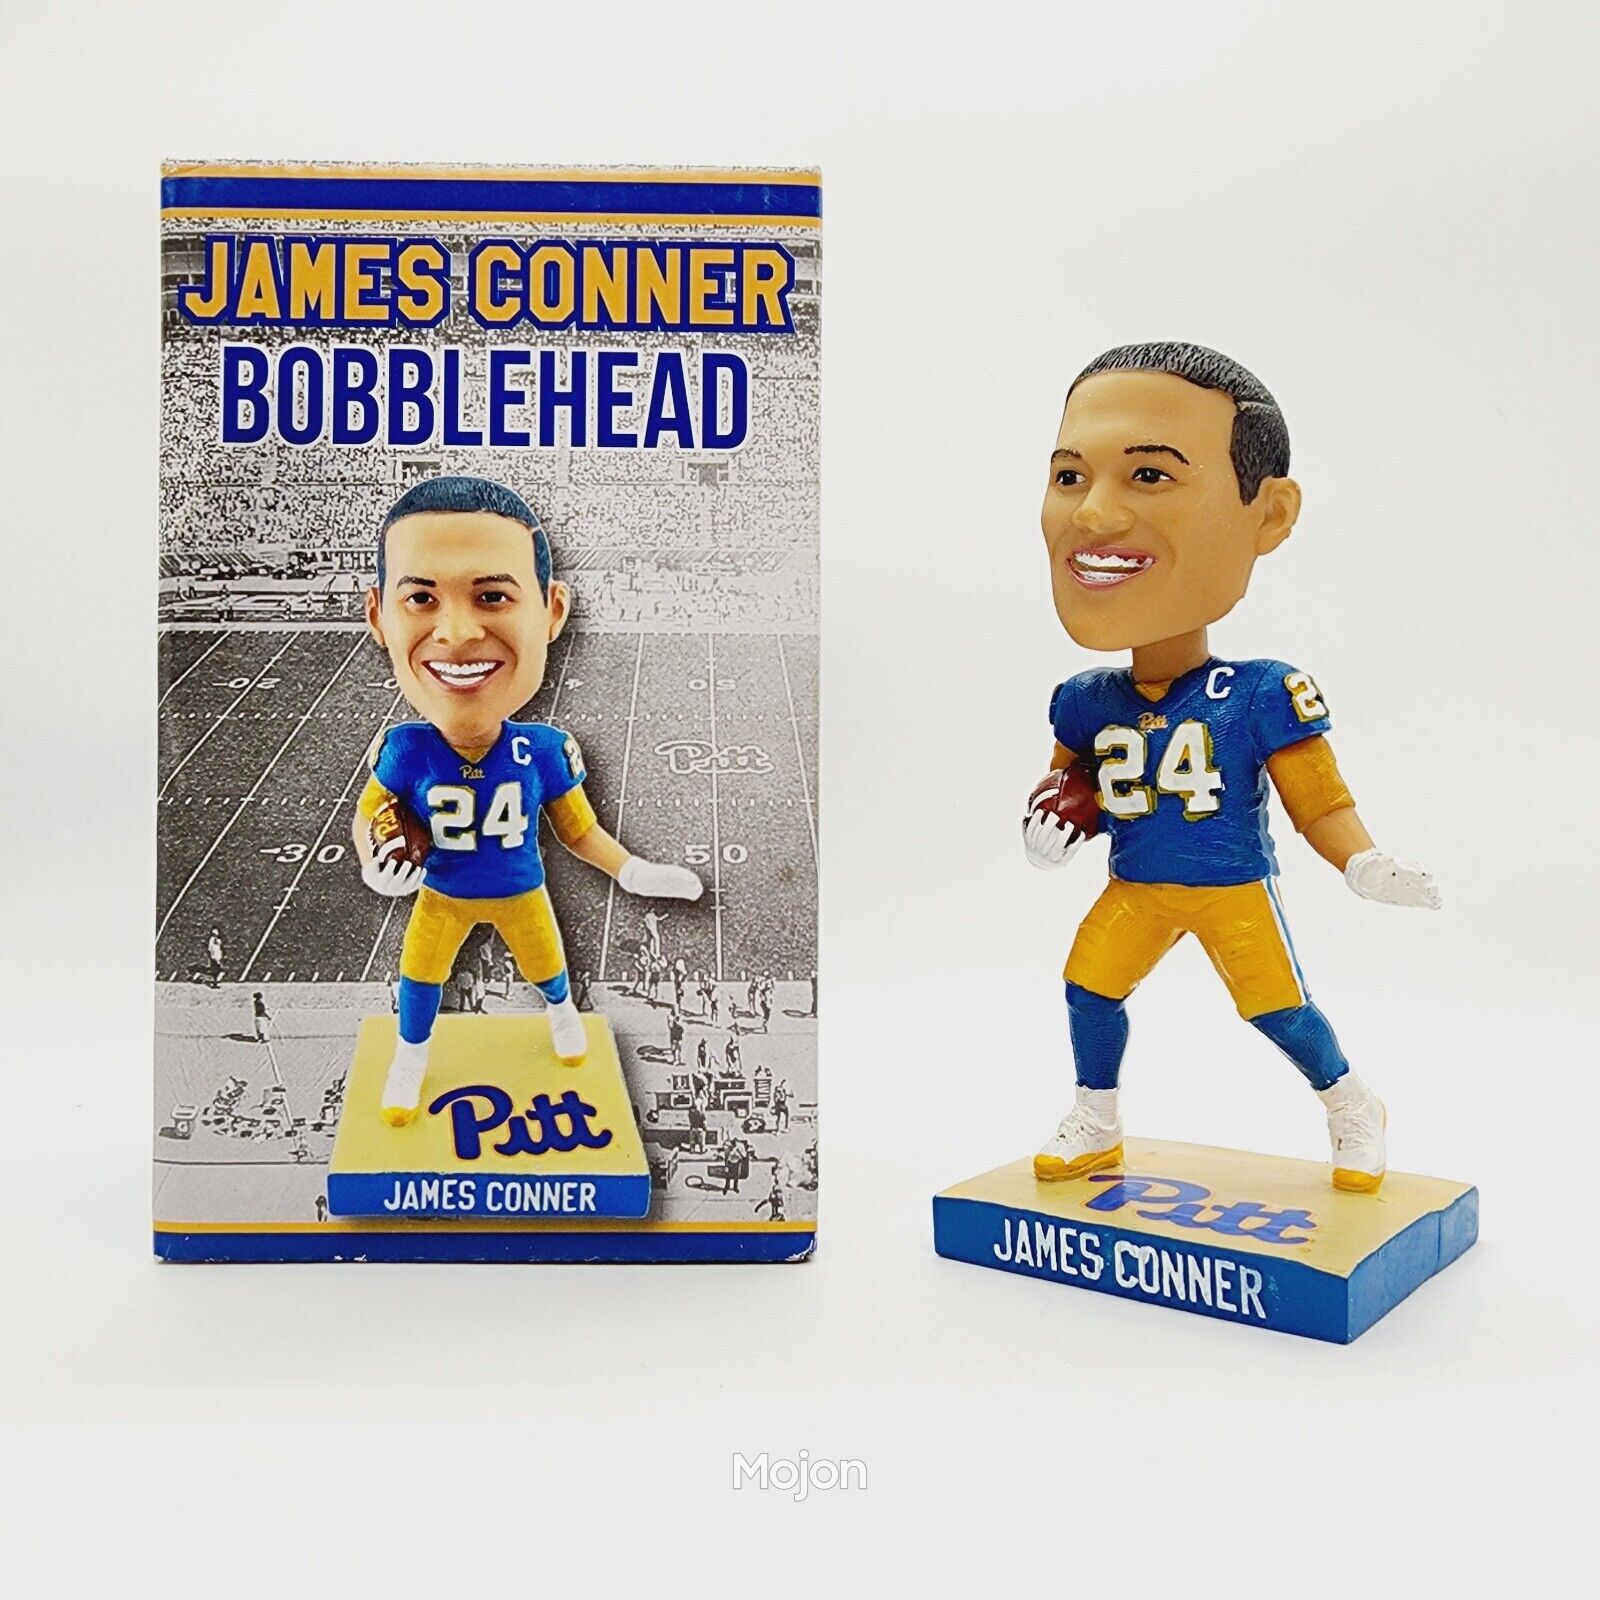 James Conner Pitt Bobblehead University of Pittsburgh Panthers #24 Football ACC